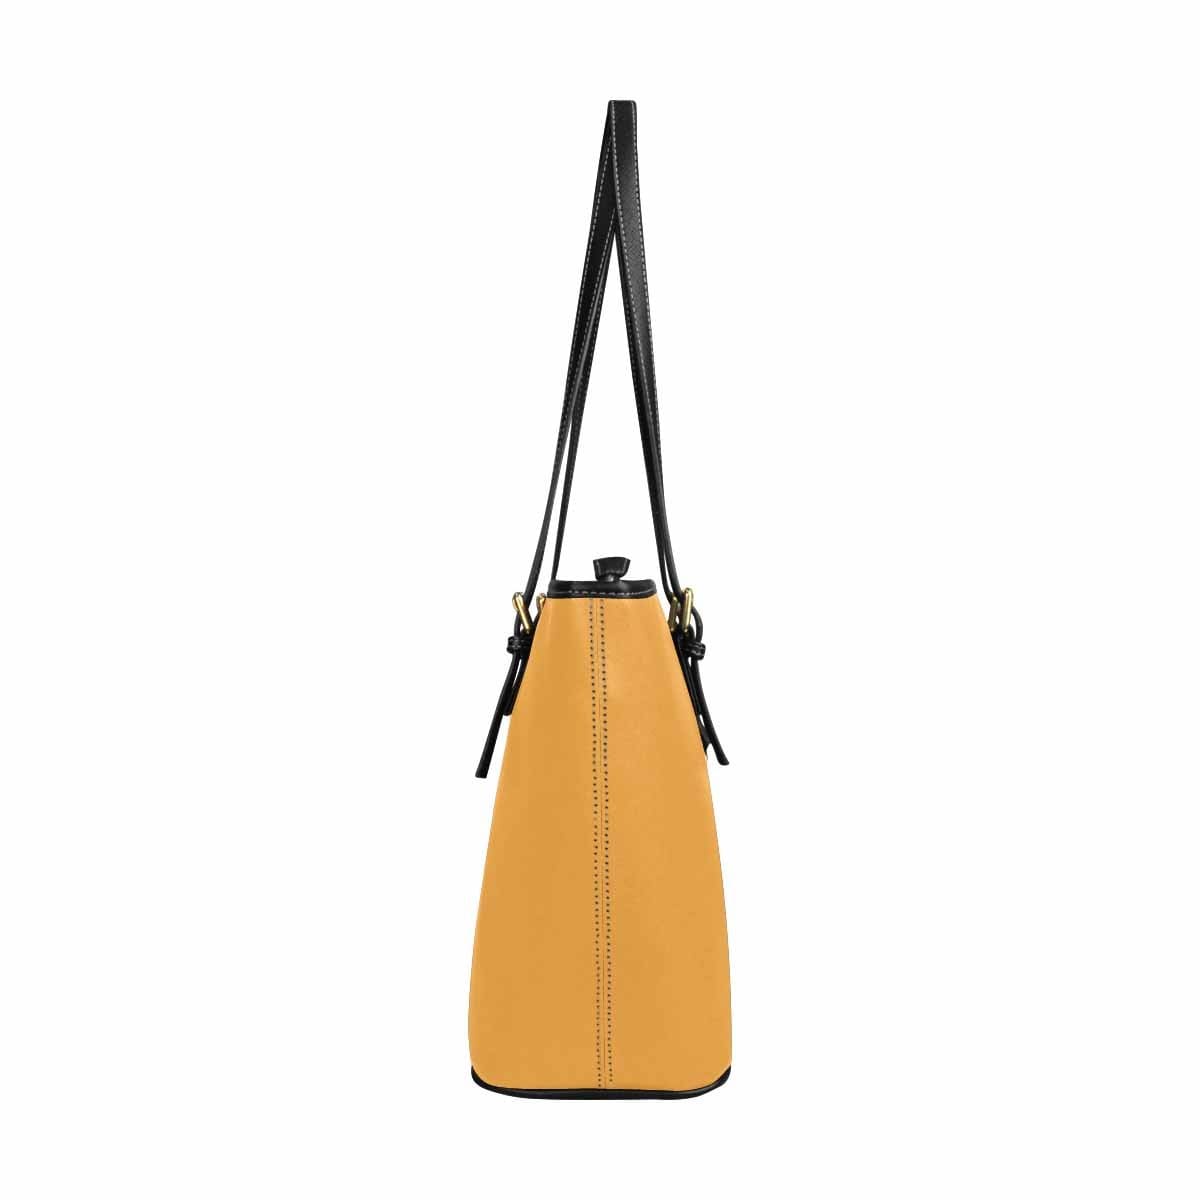 Large Leather Tote Shoulder Bag - Yellow Orange - Bags | Leather Tote Bags